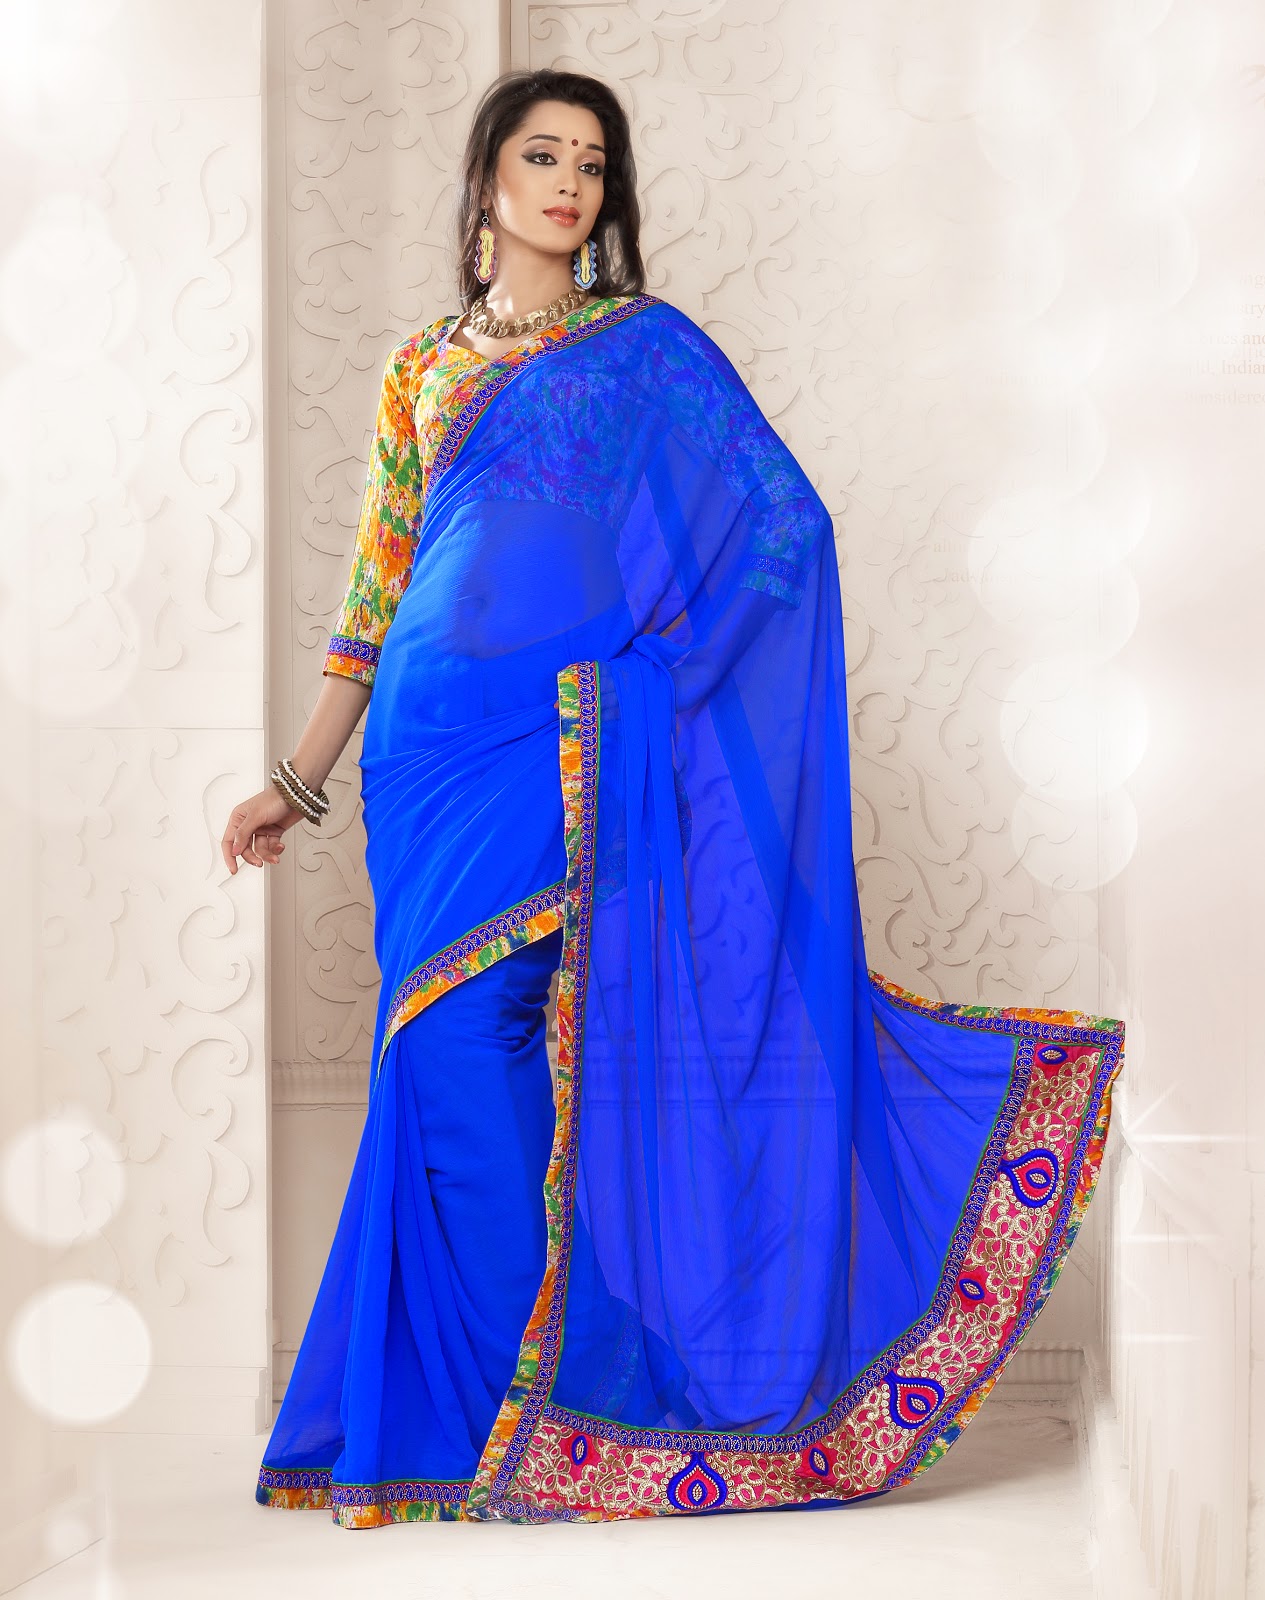 Blue simple party wear saree with multi colored blouse